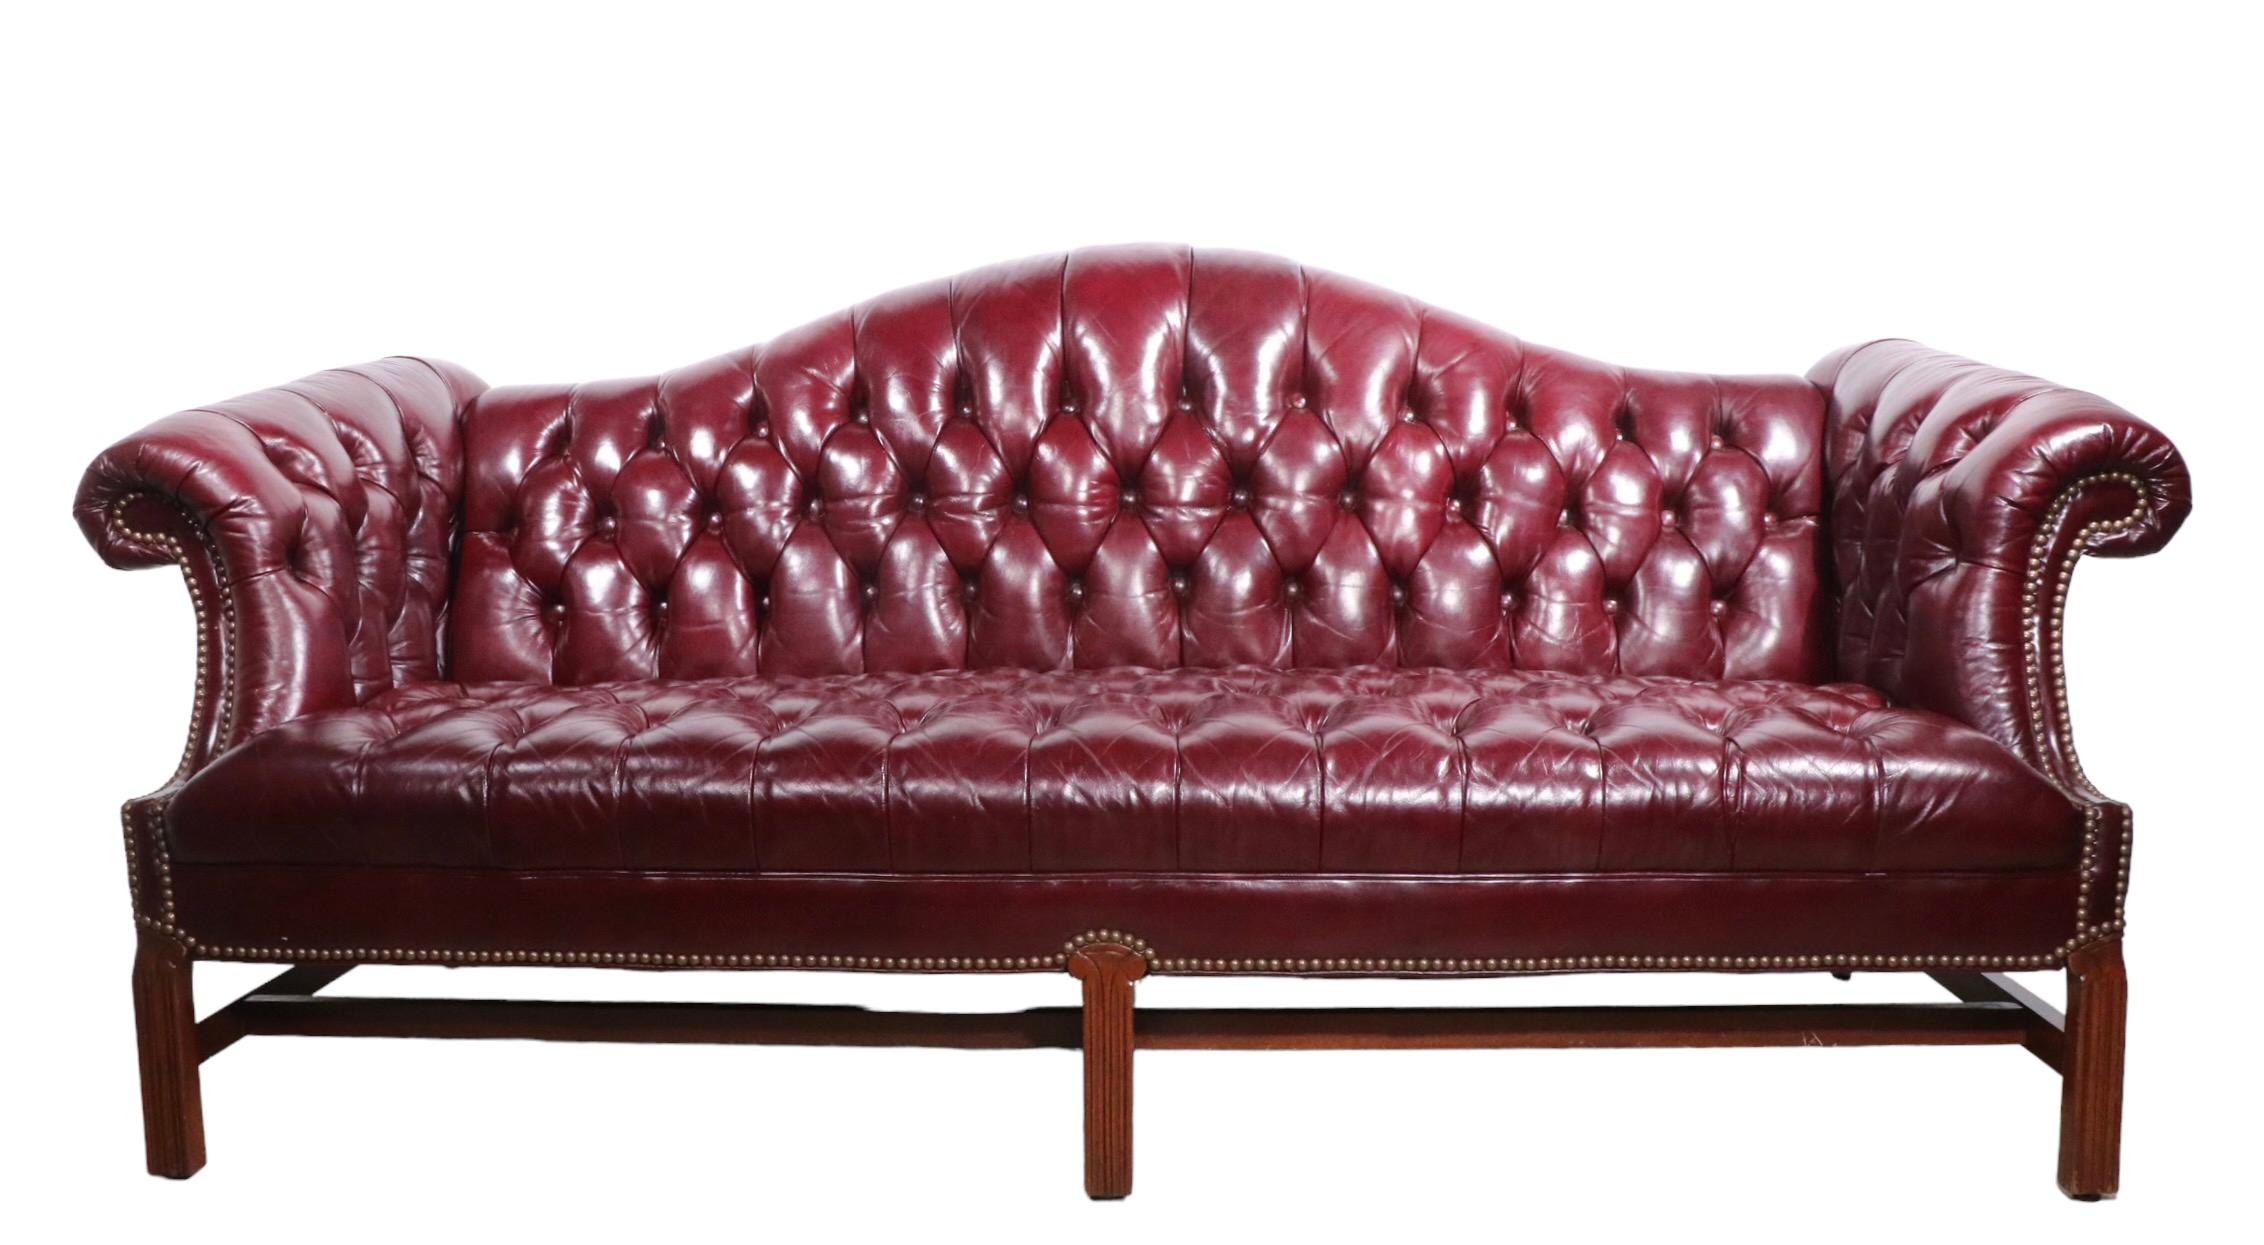  Tufted Burgundy  Leather Chesterfield Sofa c 1950/1960's For Sale 3